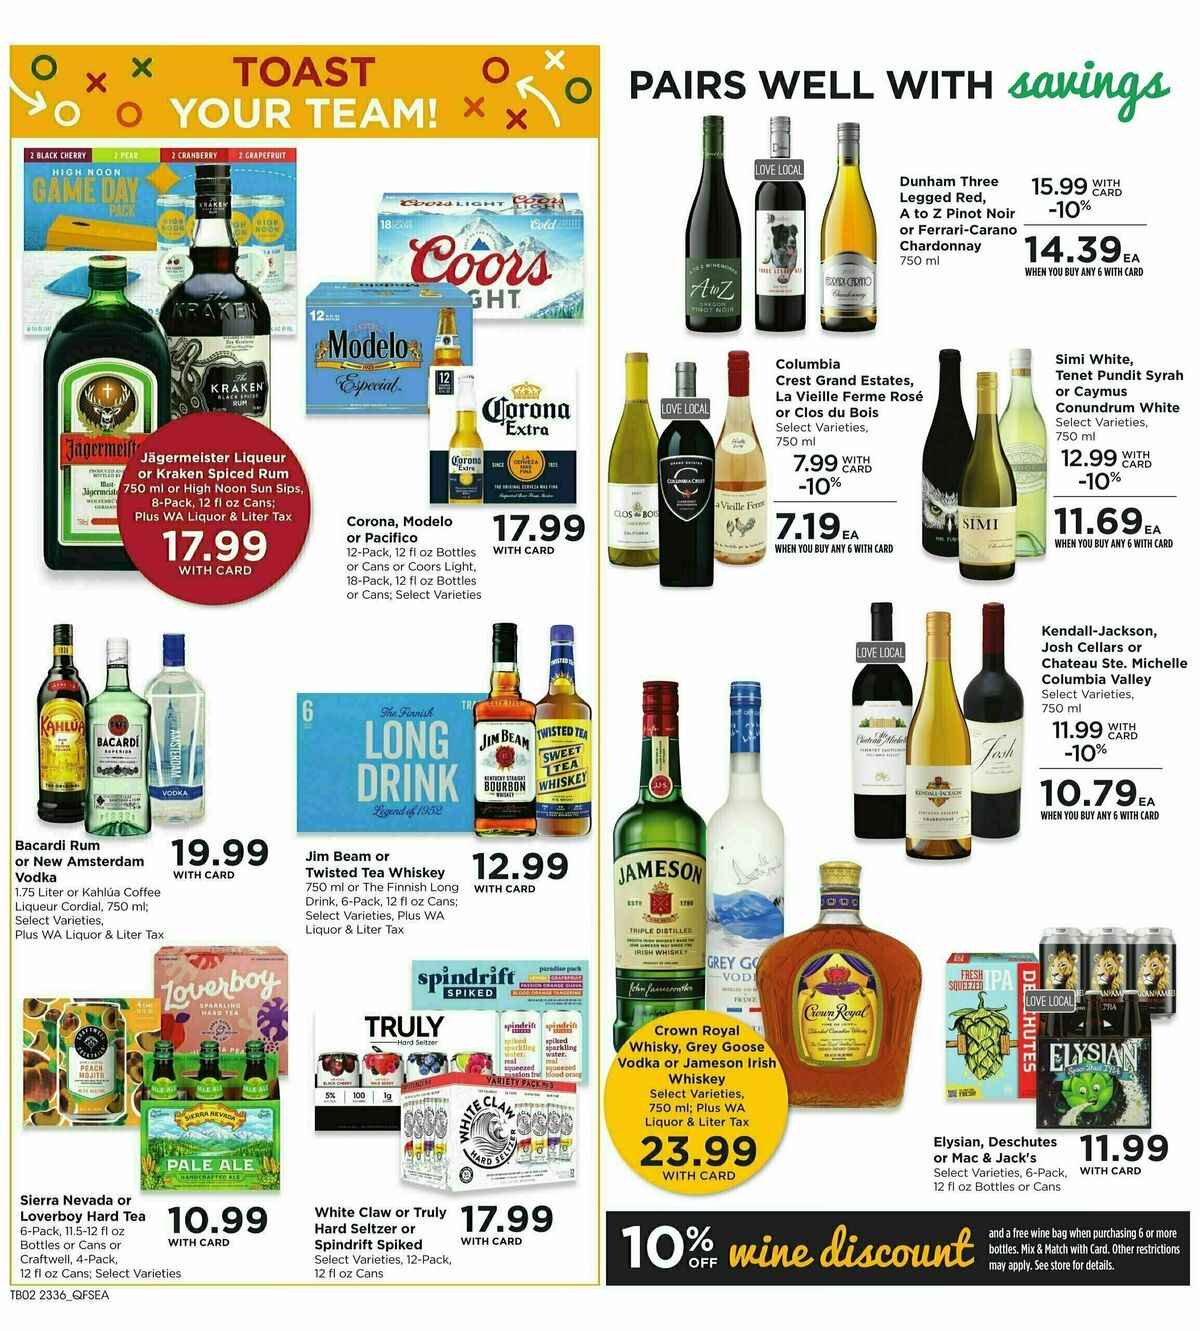 QFC Weekly Ad from October 4